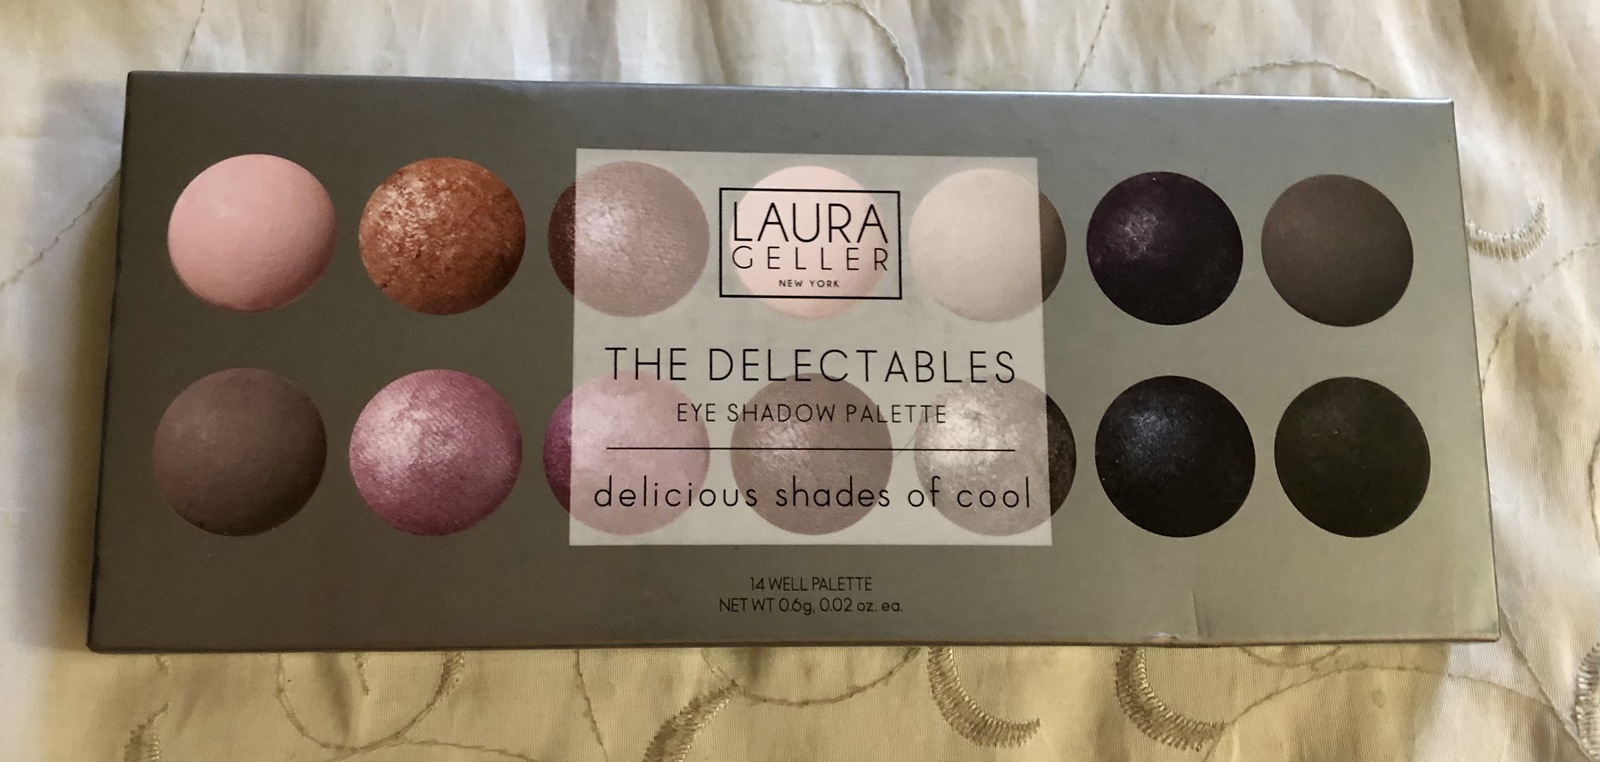 Laura Geller The Delectables Baked Eye Shadow Palette Delicious Shades Of Cool - $39.95